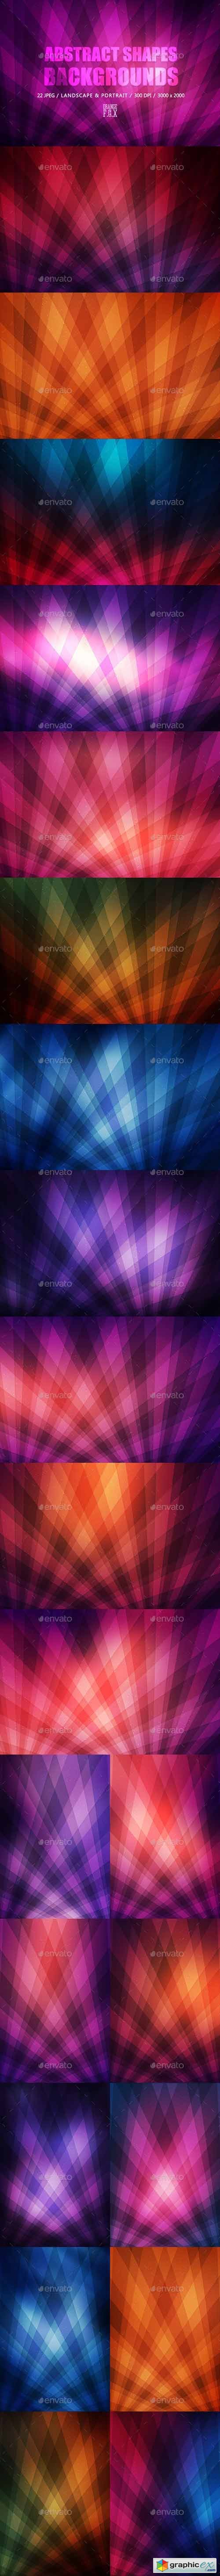 22 Abstract Shapes Backgrounds